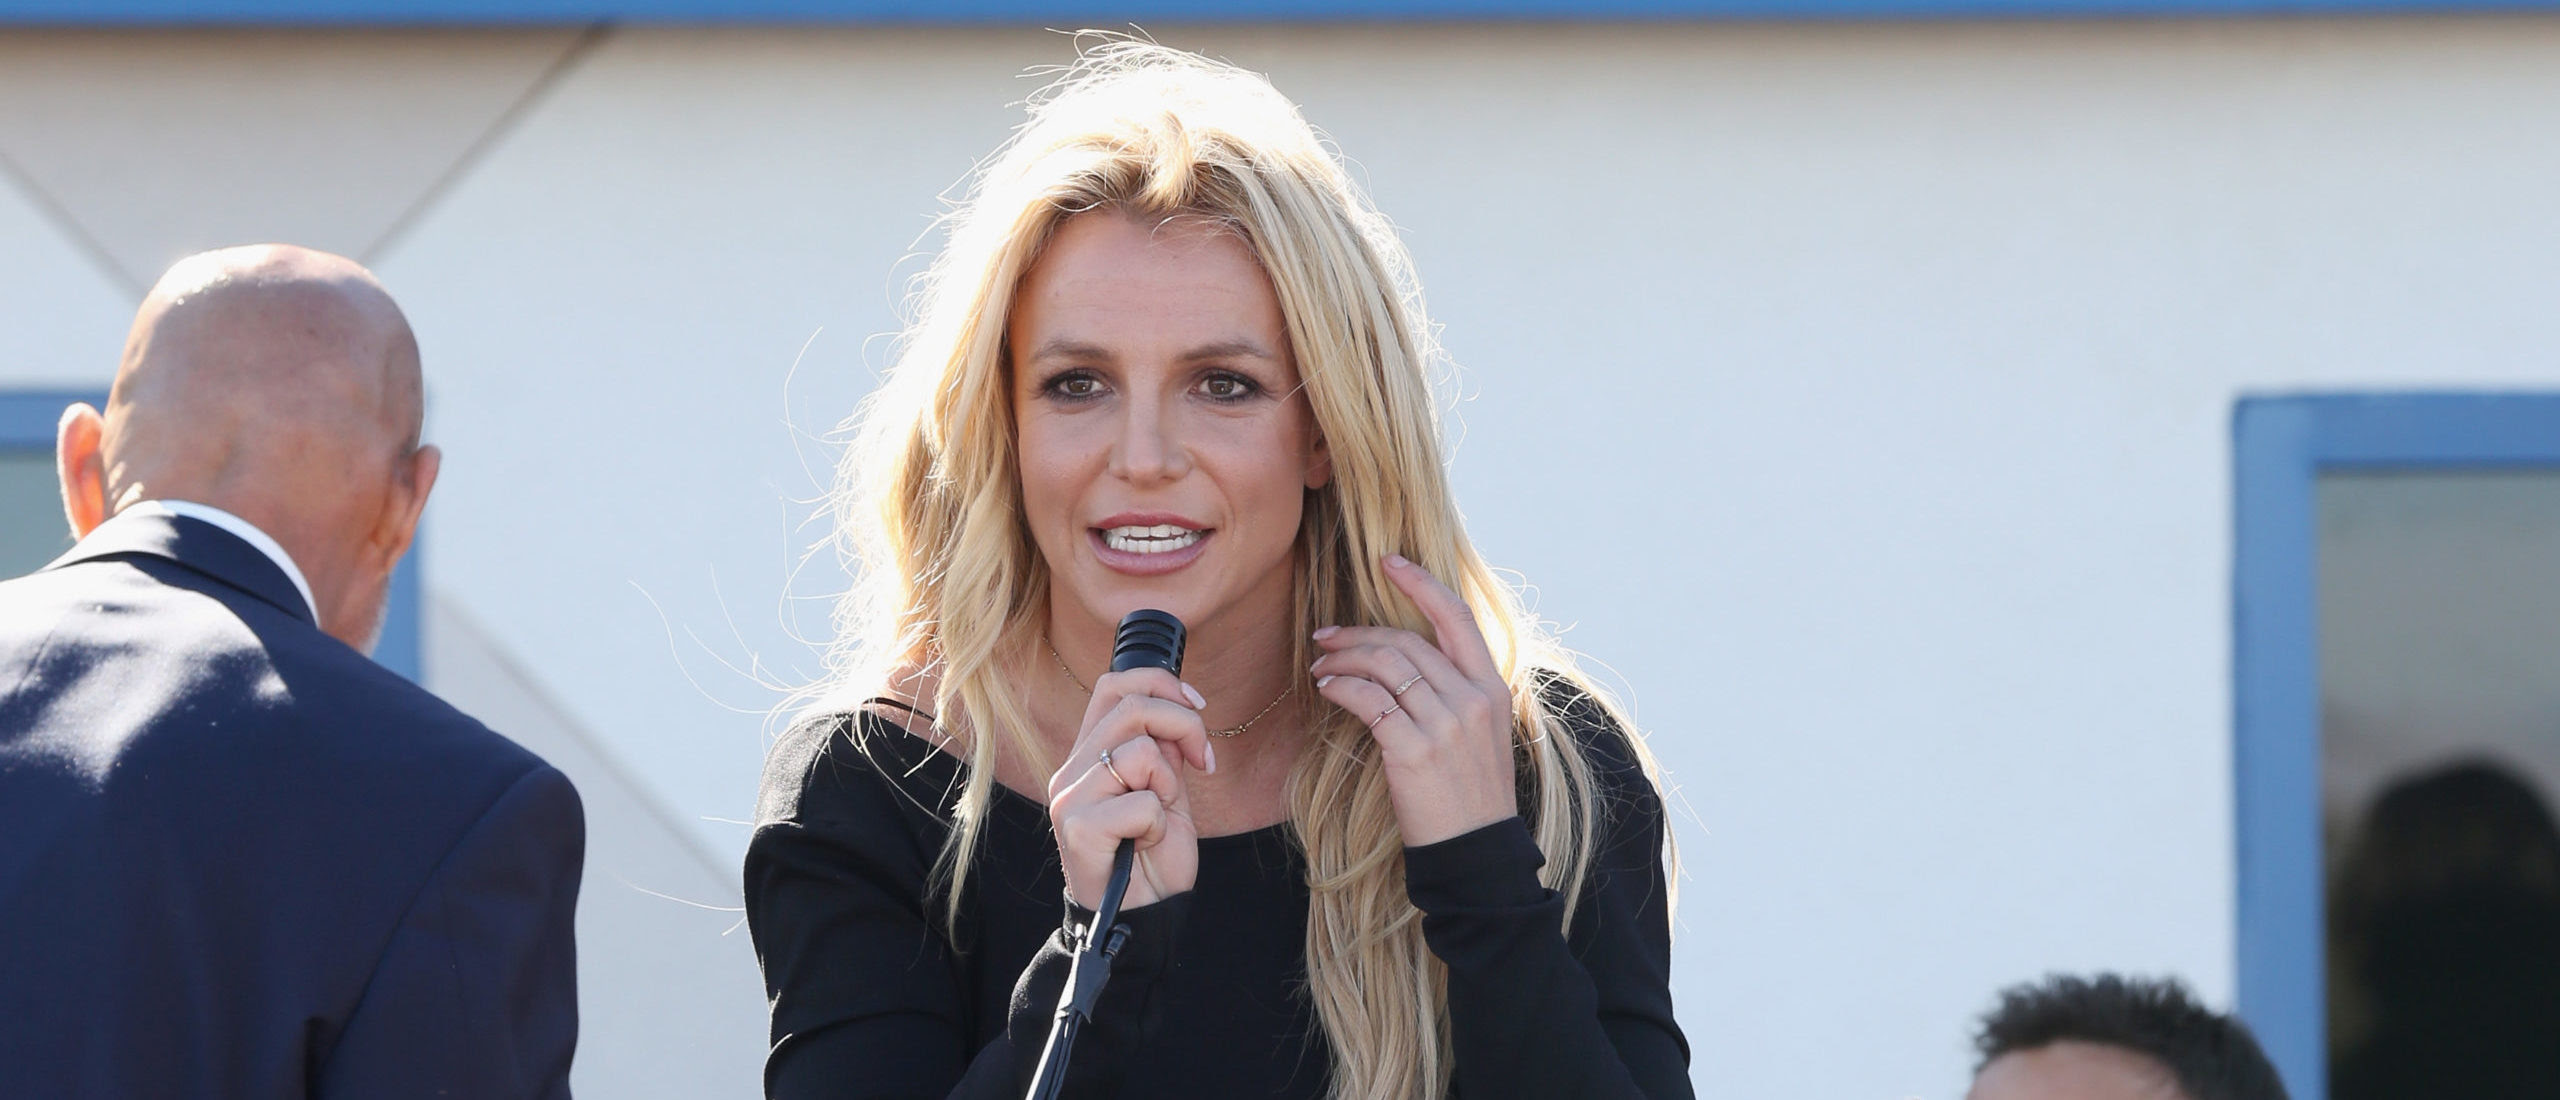 REPORT: Britney Spears Seems To Announce She’s Pregnant, Leaves Fans Perplexed